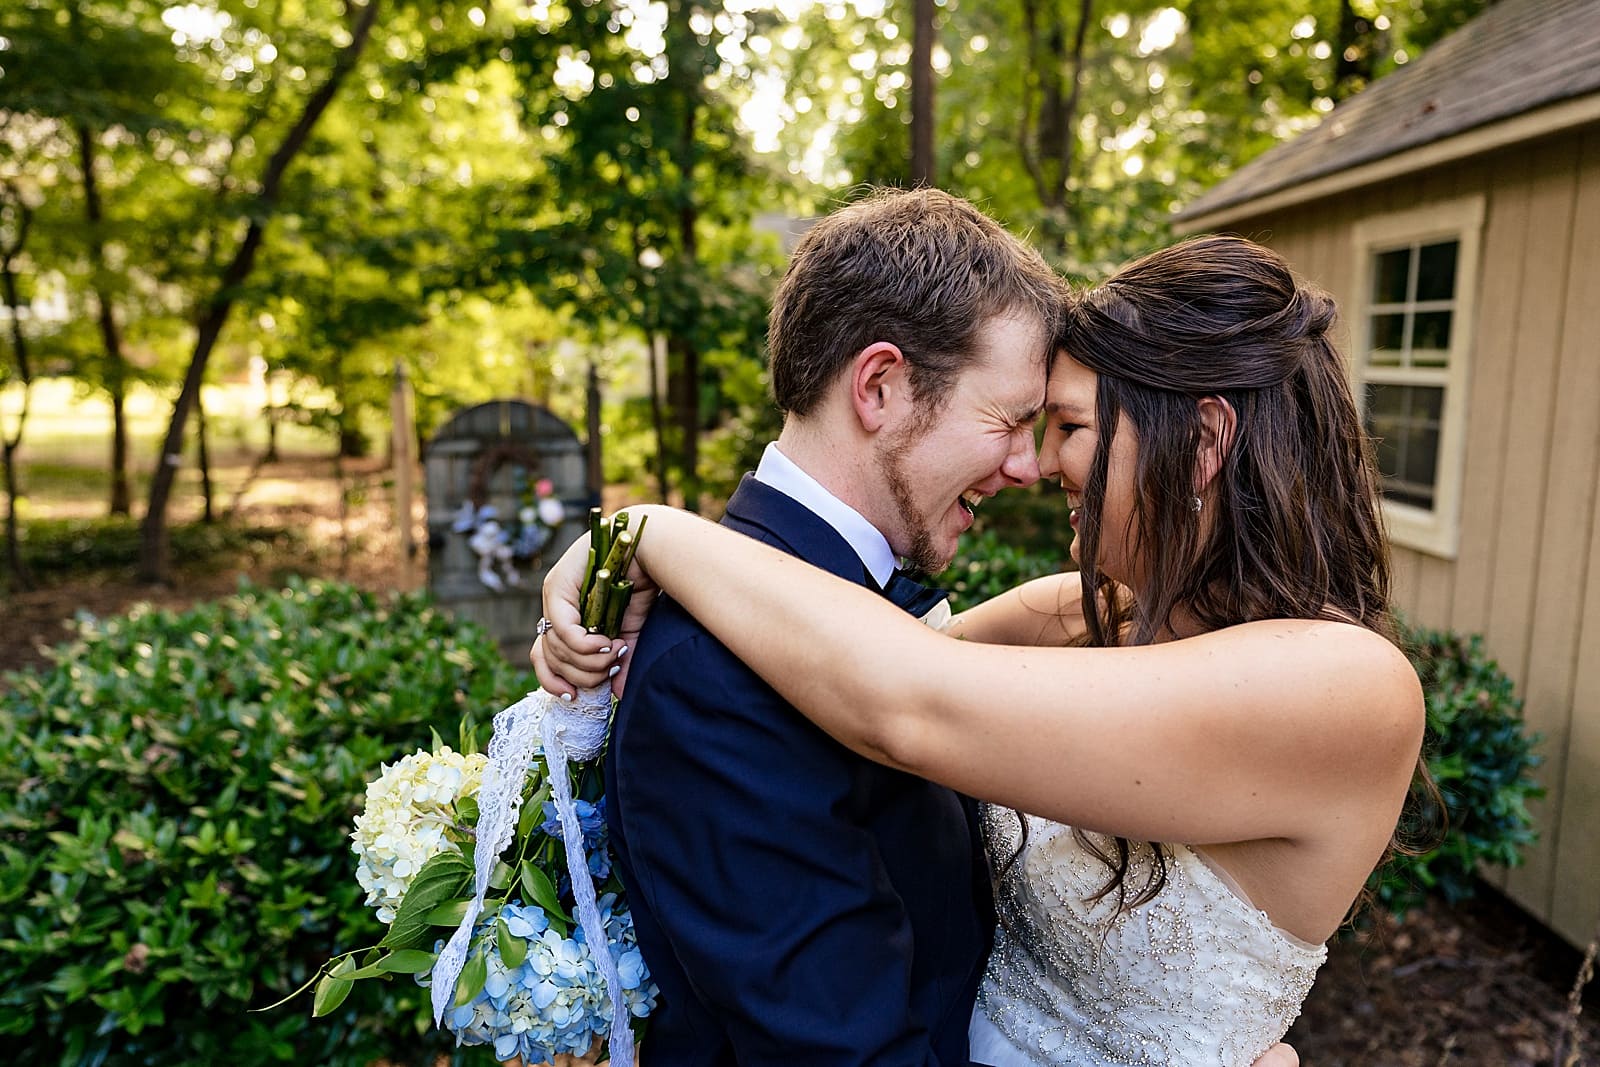 This couple had a DIY wedding in the groom's parents' backyard